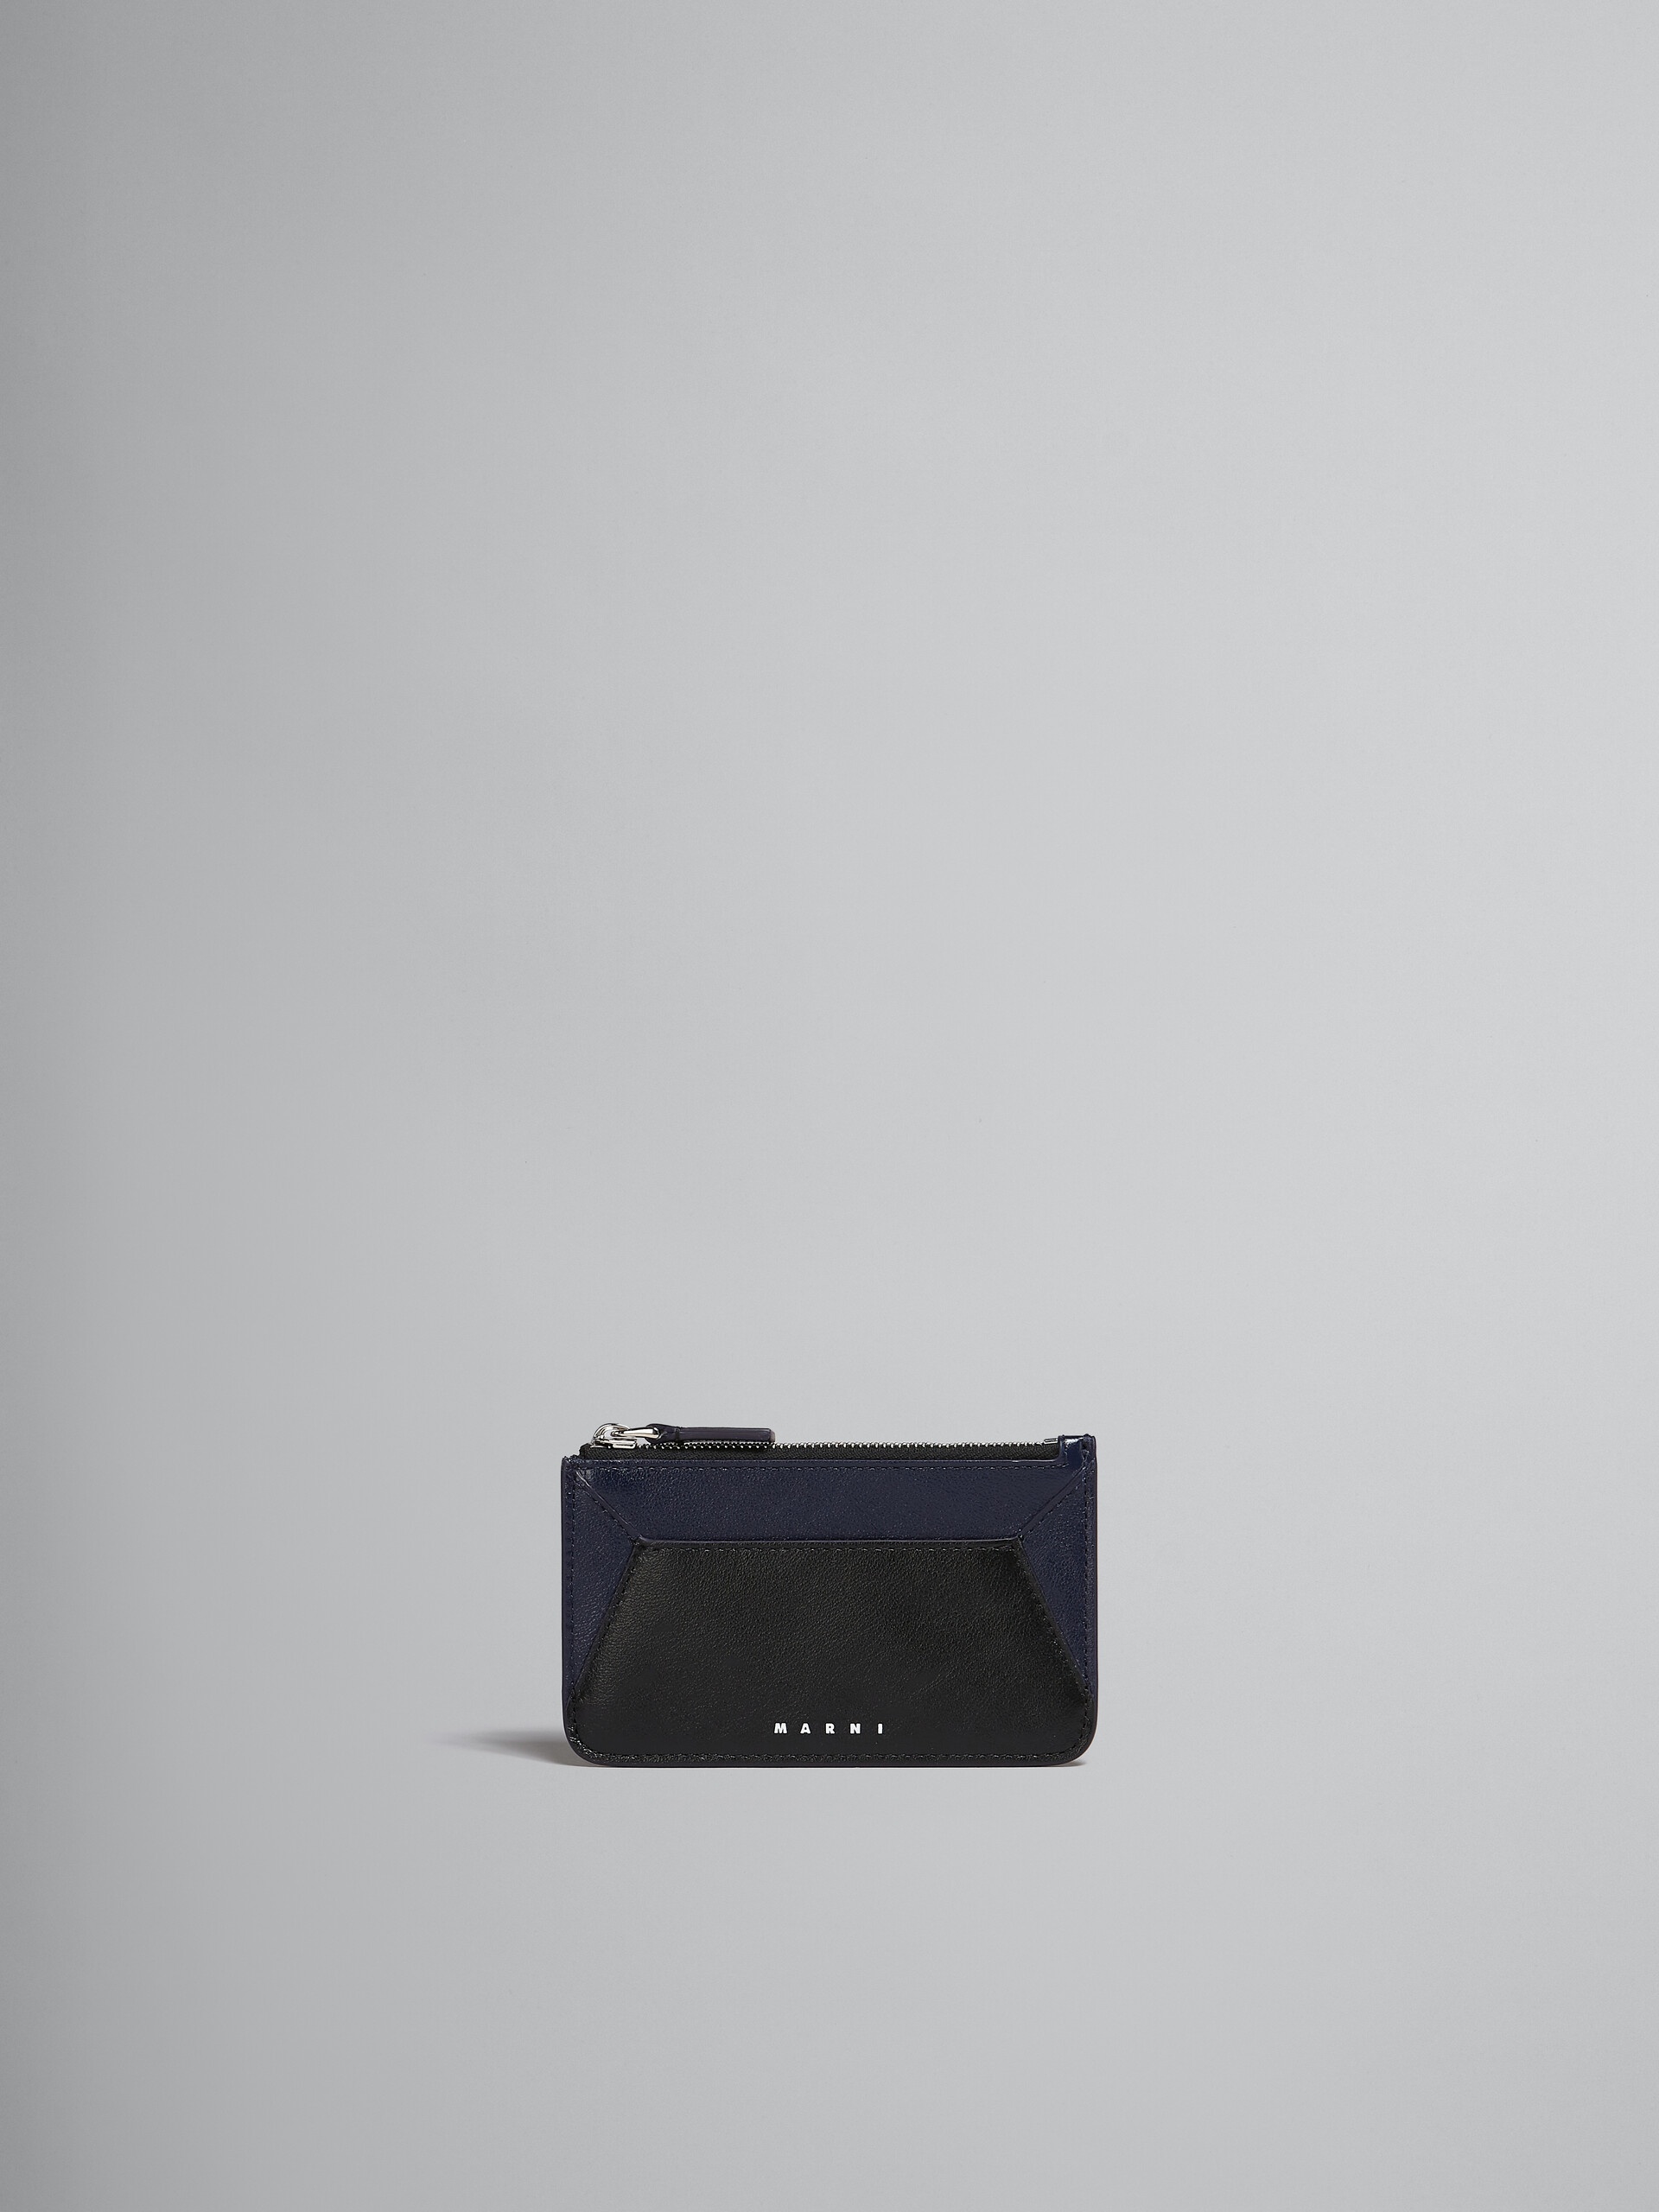 NAVY BLUE AND BLACK LEATHER CARD CASE - 1